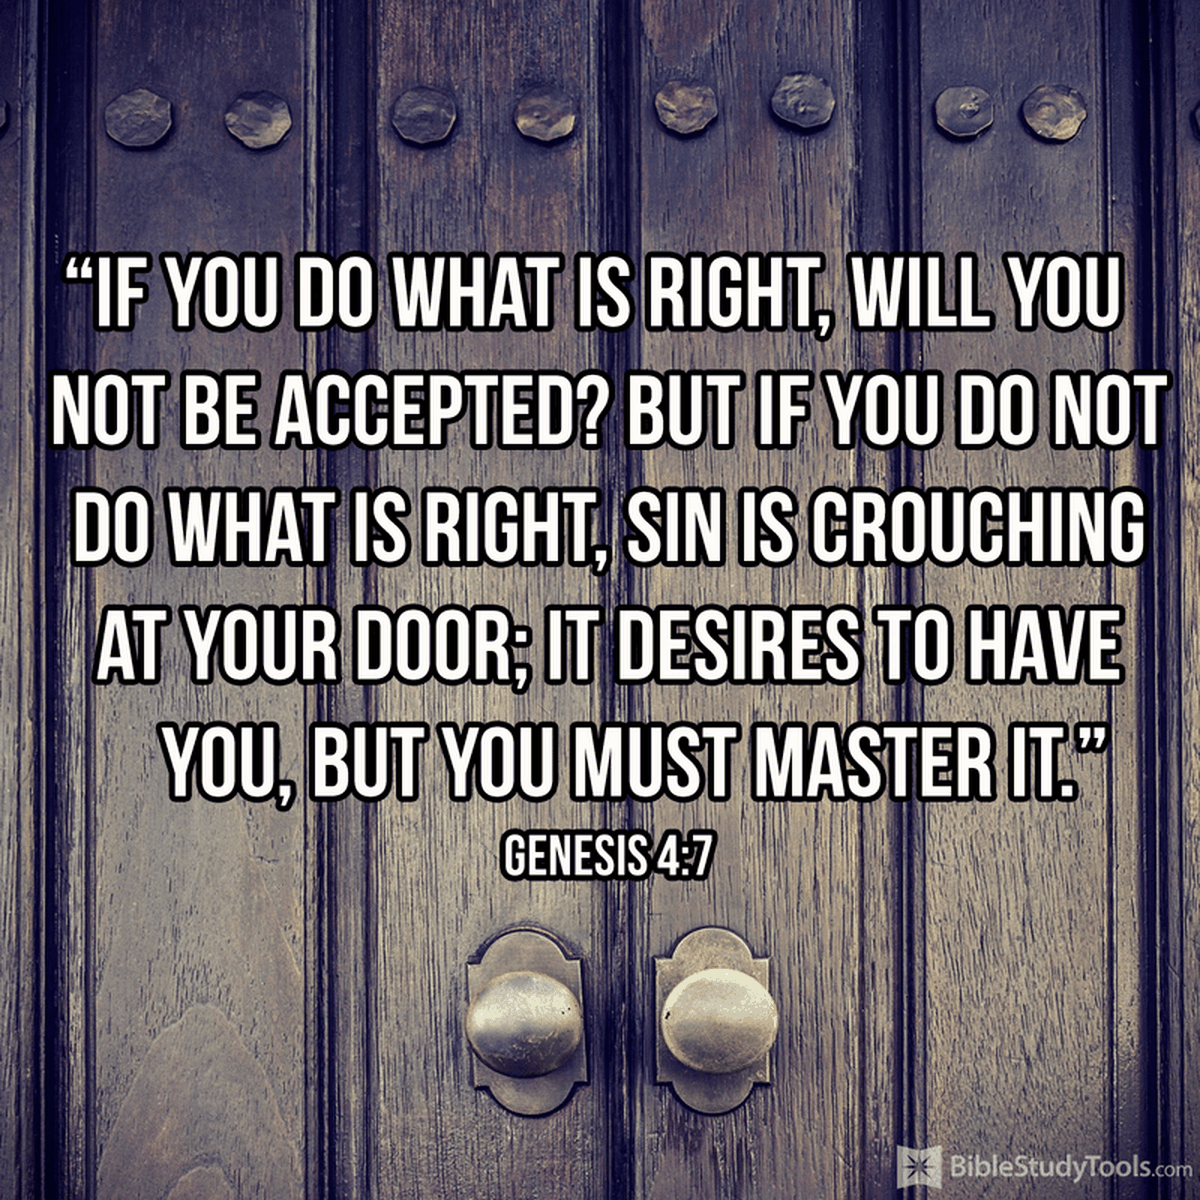 If You Do What is Right